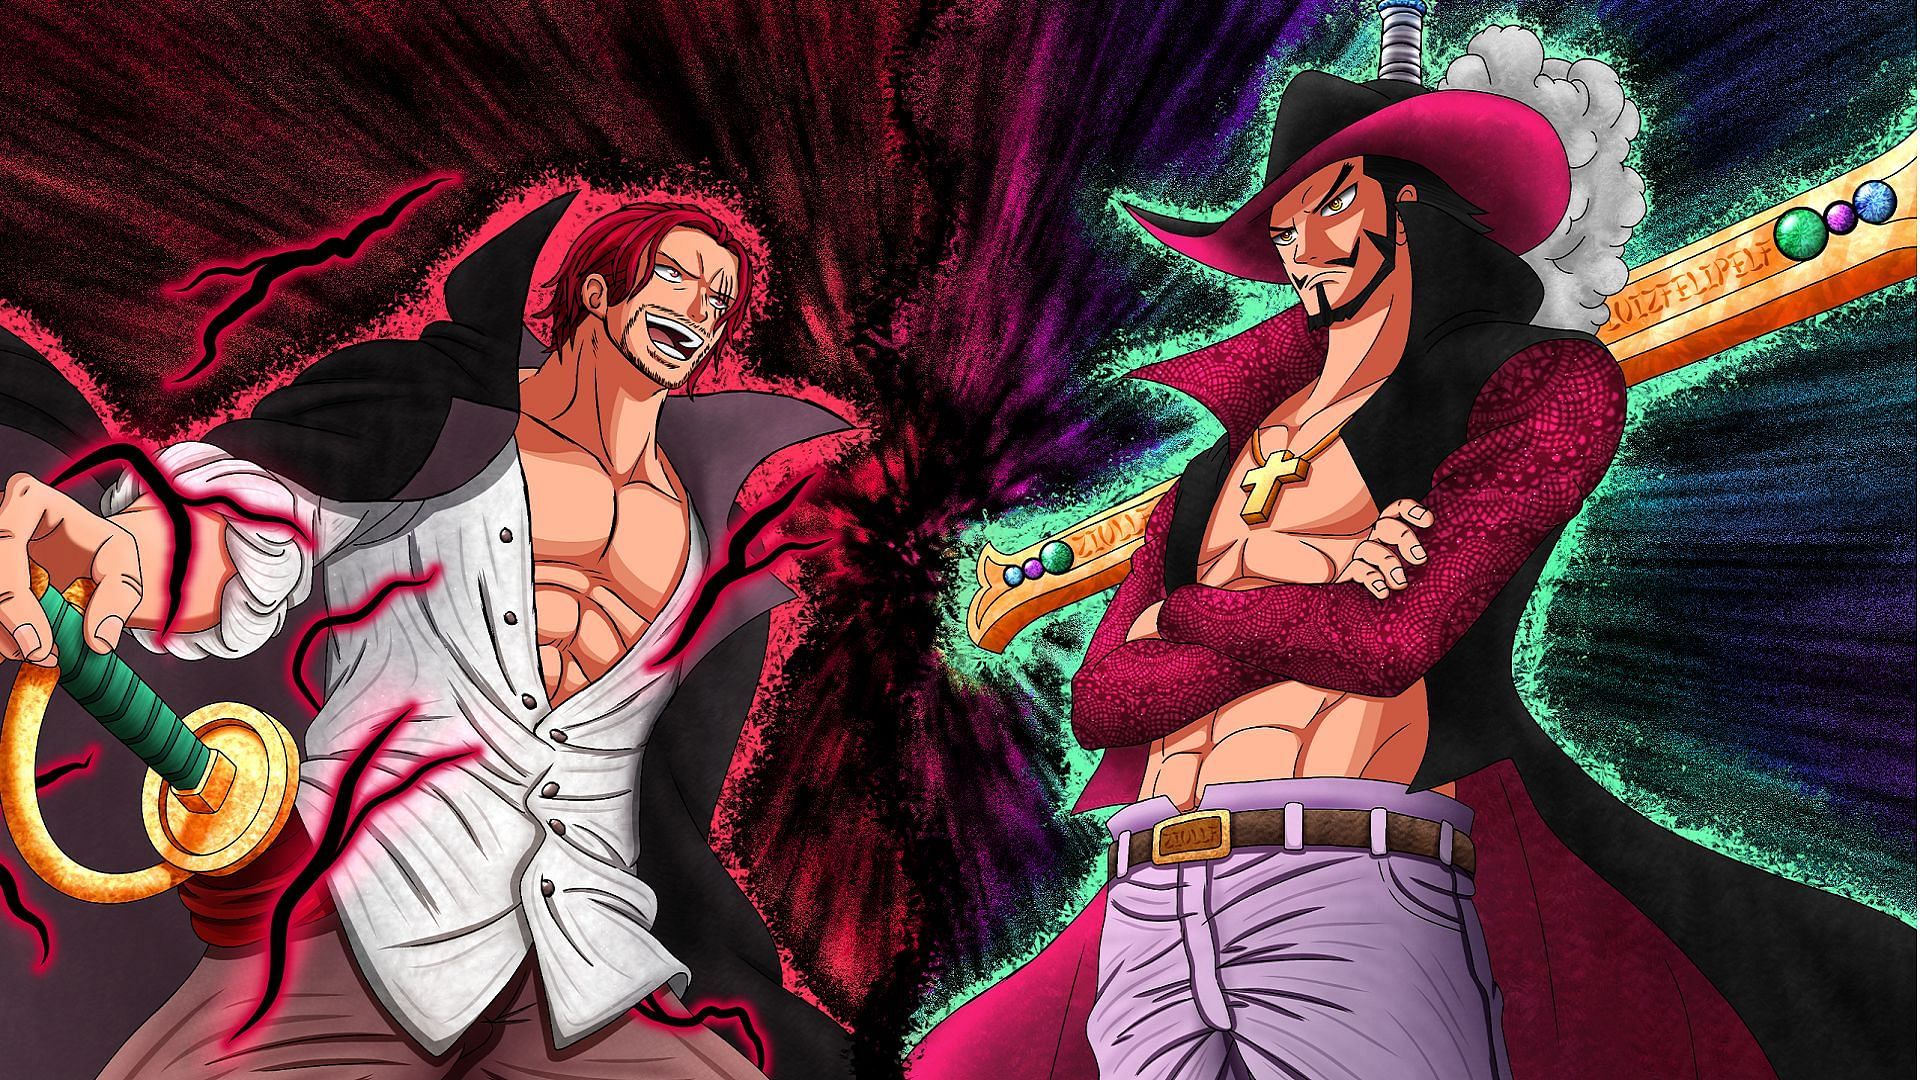 What's your take on Shanks and Mihawk in One Piece Live Action